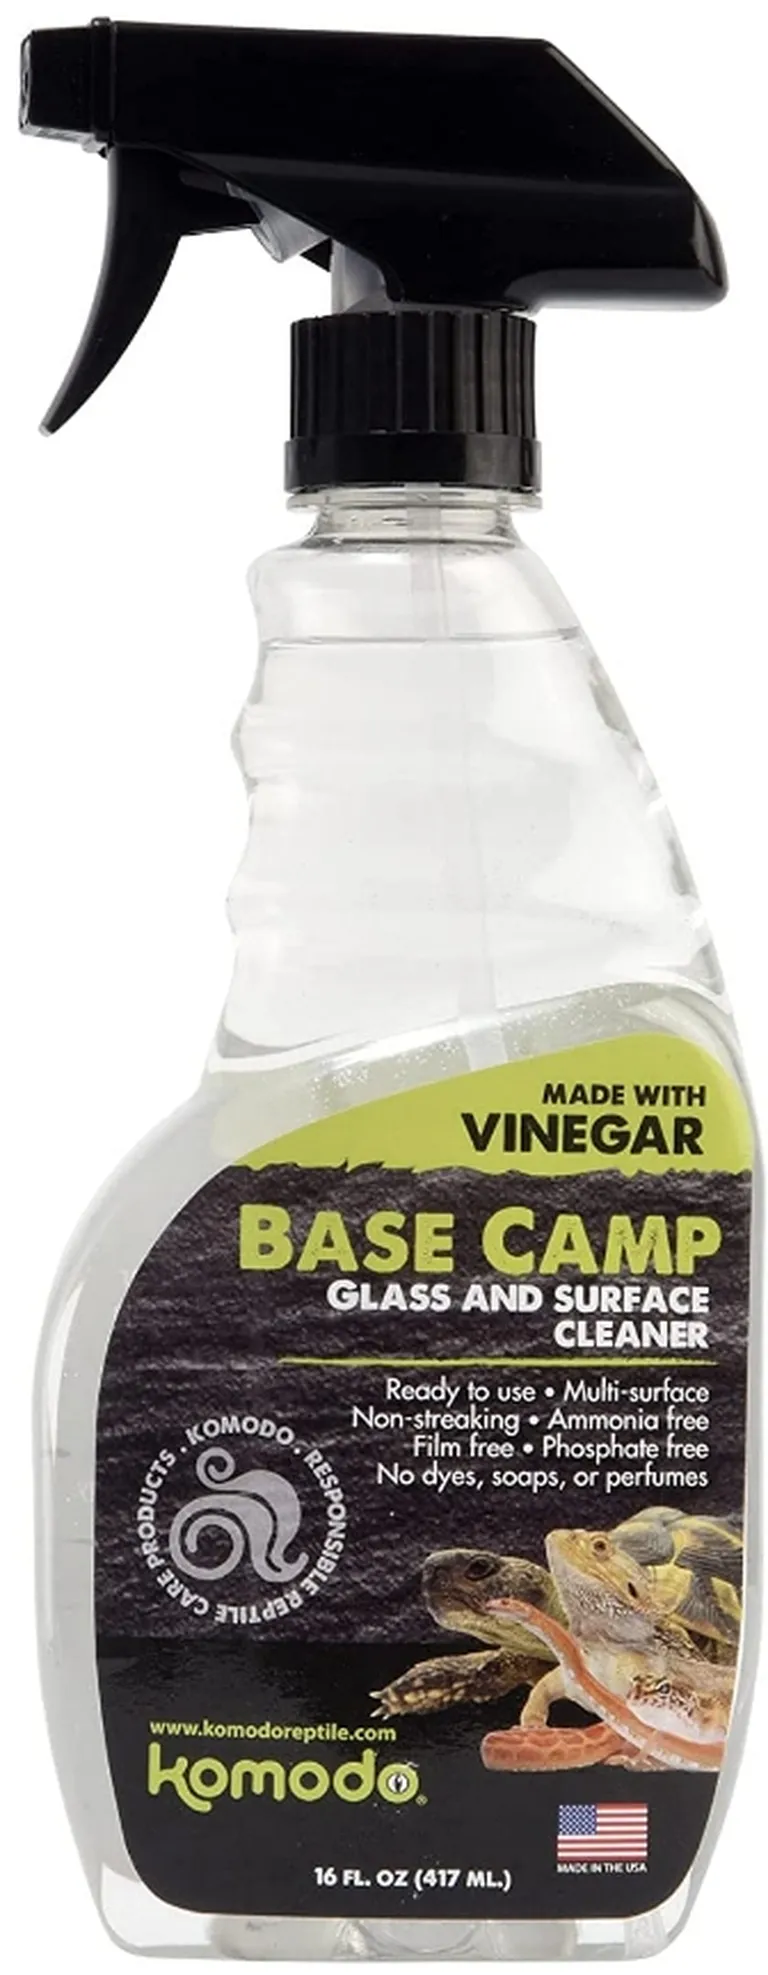 Komodo Base Camp Glass and Surface Cleaner Photo 1